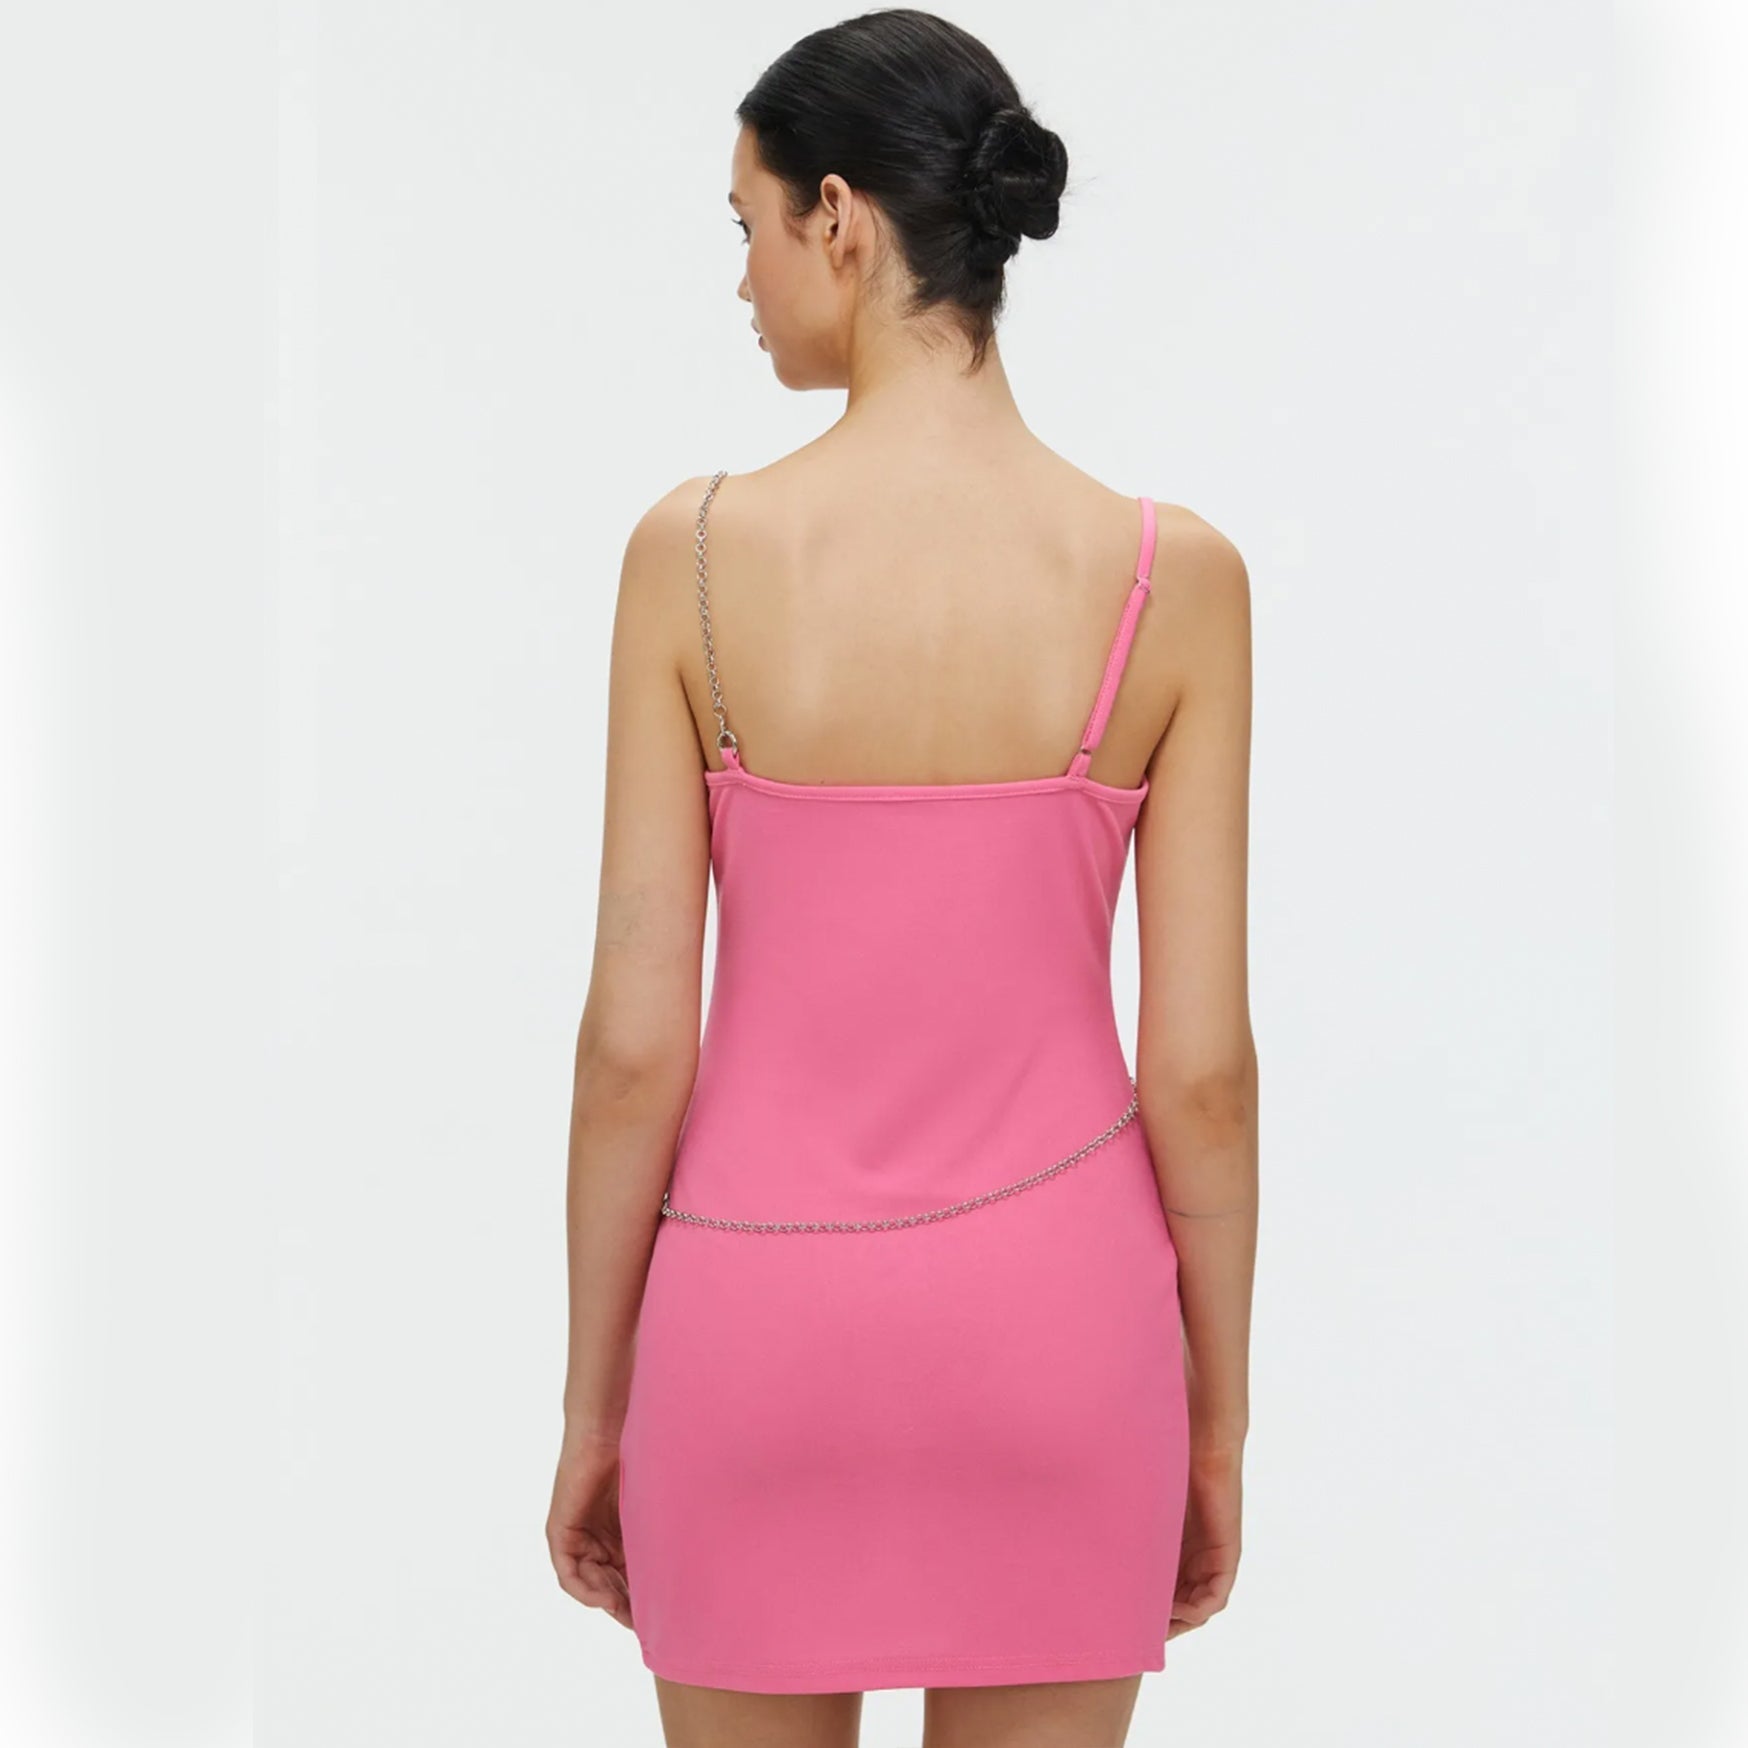 Asymmetric Short Dress With Chain Detail - Pink S